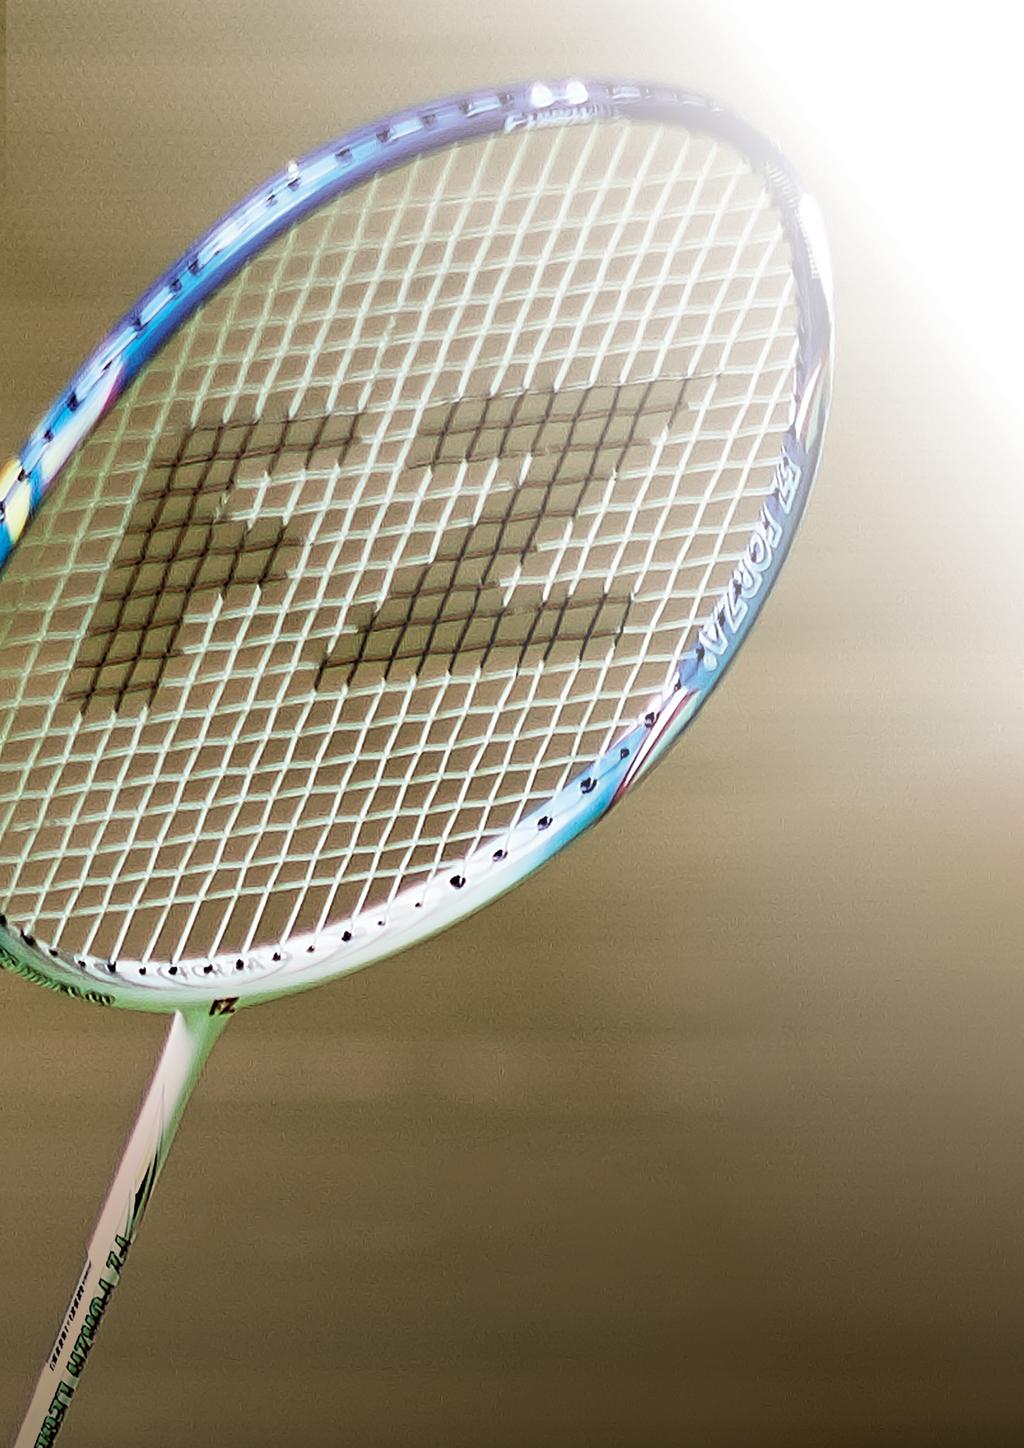 If you are looking for speed and easier play, this is where you should look. Introducing a range of rackets, that are light, thin, fast and furious.